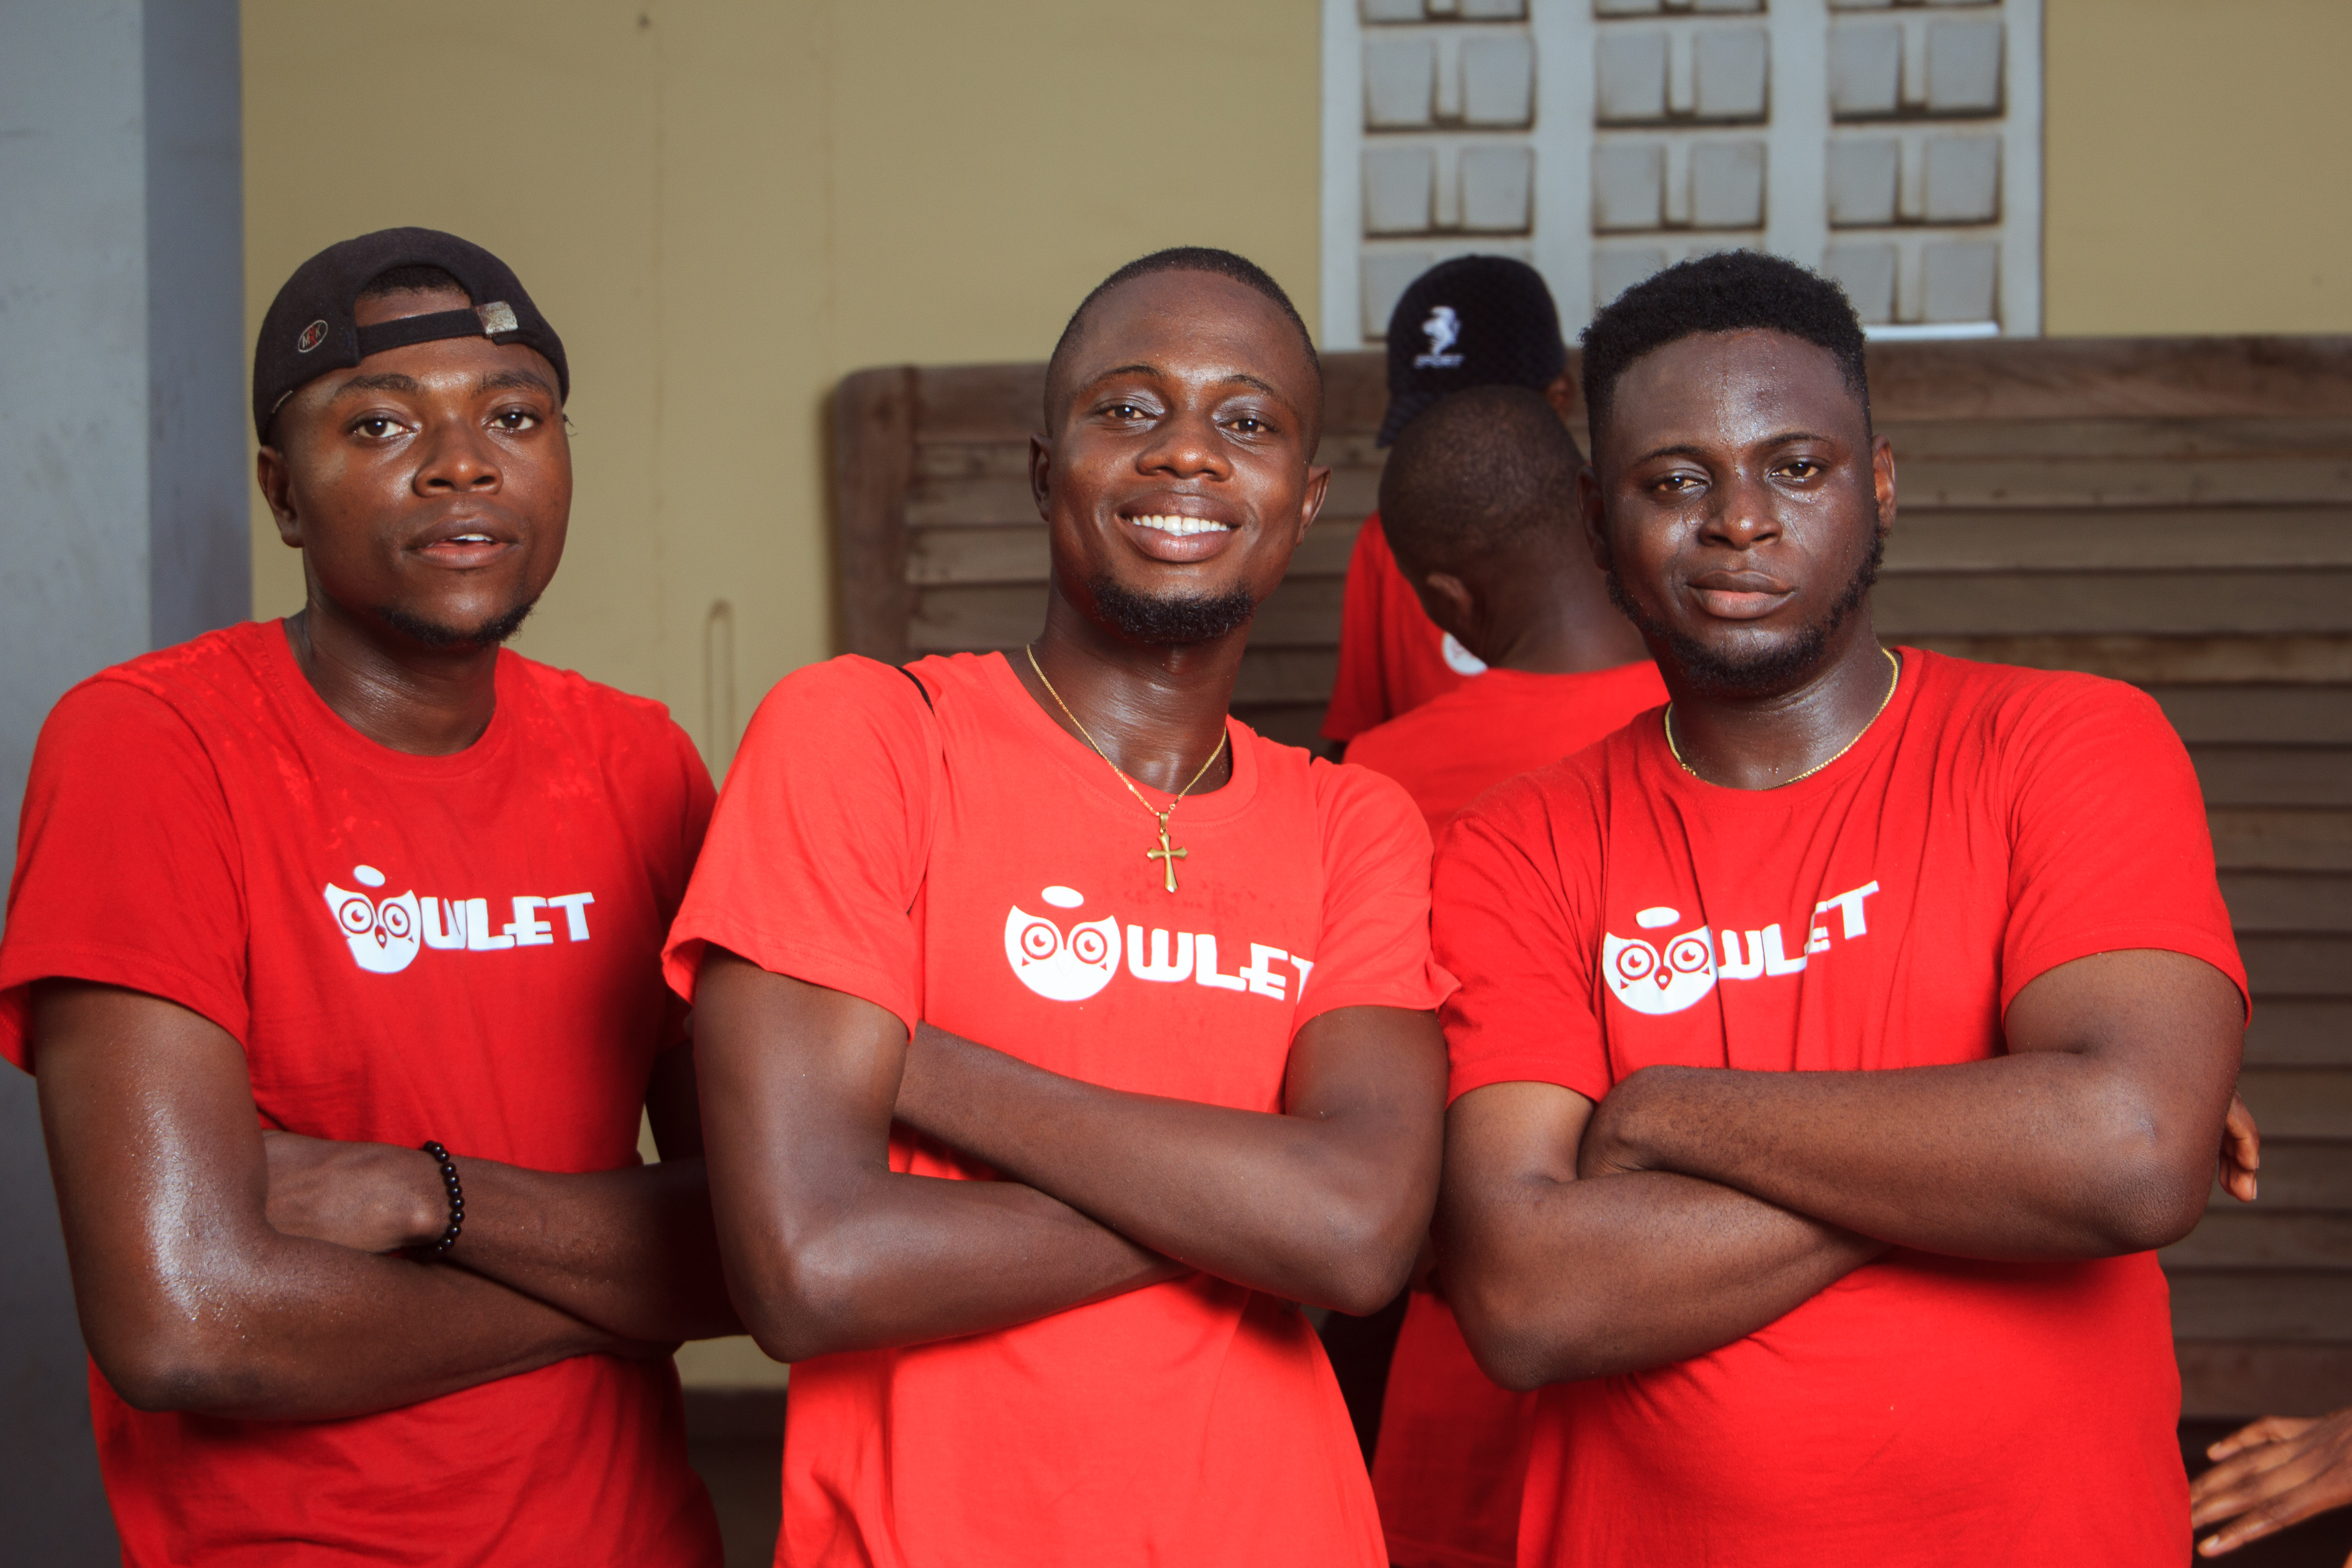 The Owlet might be Africa's next tech unicorn, here's why